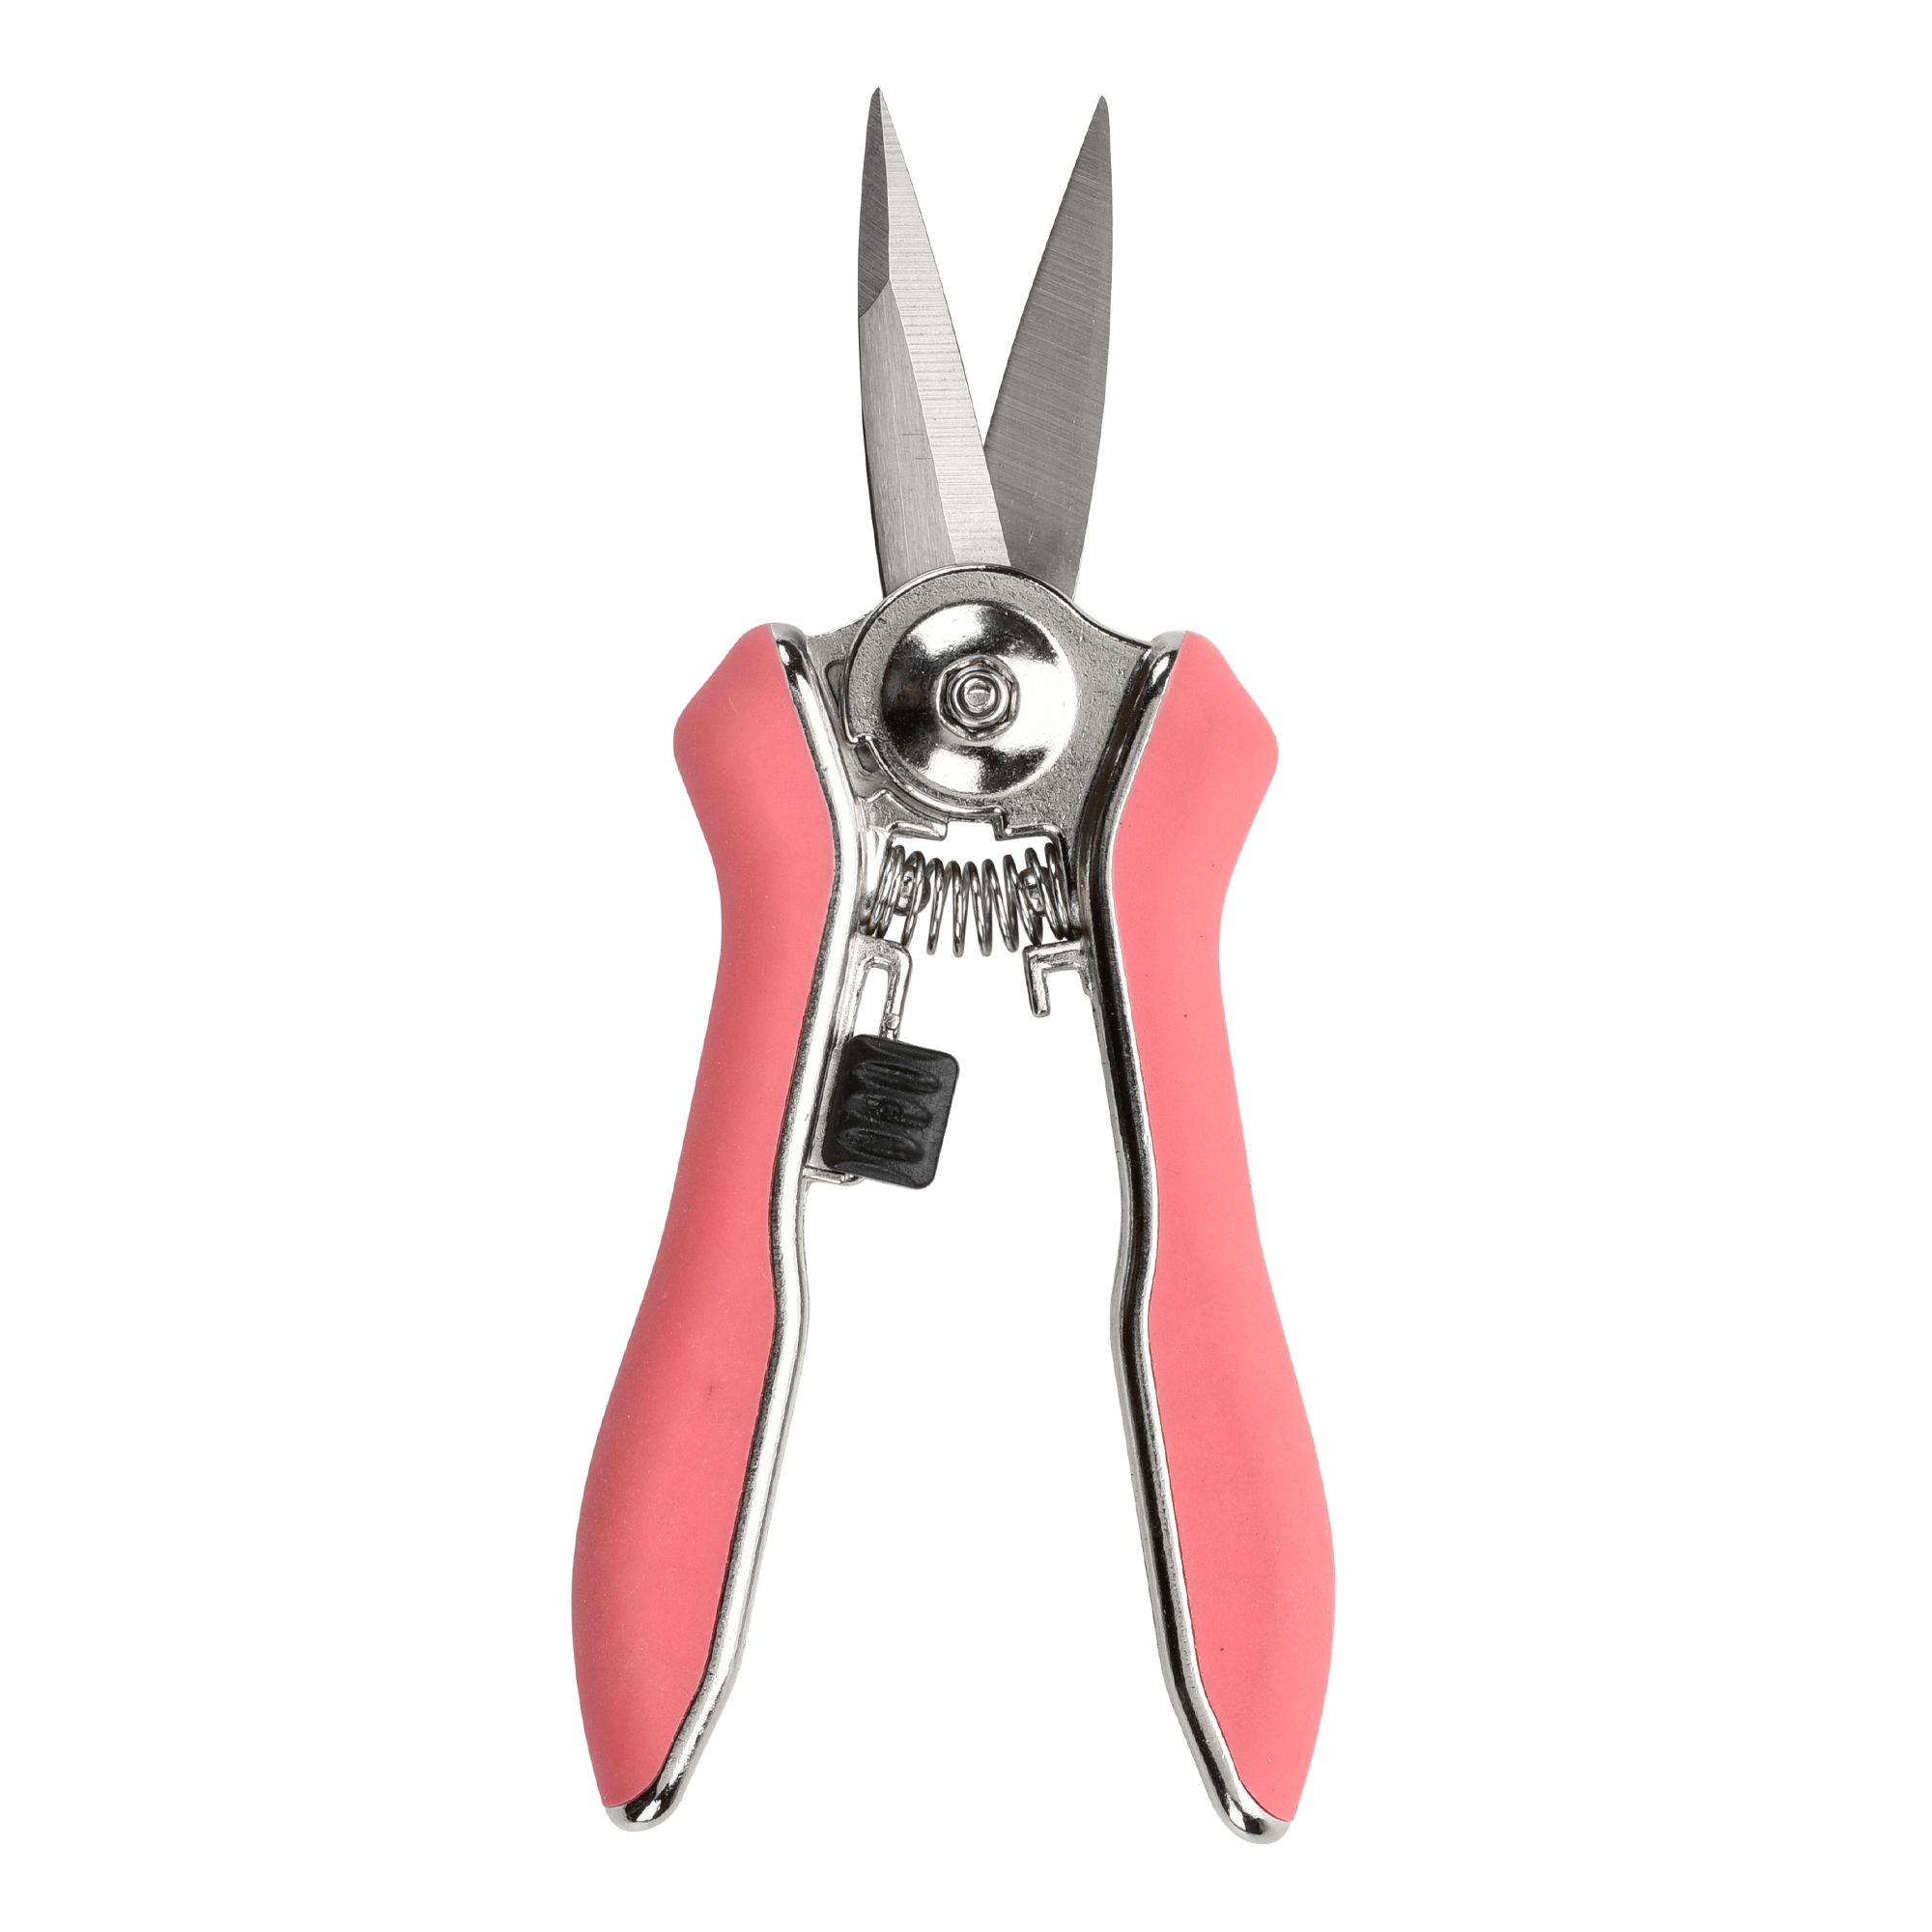 Burgon & Ball Orchid Stainless steel Snips